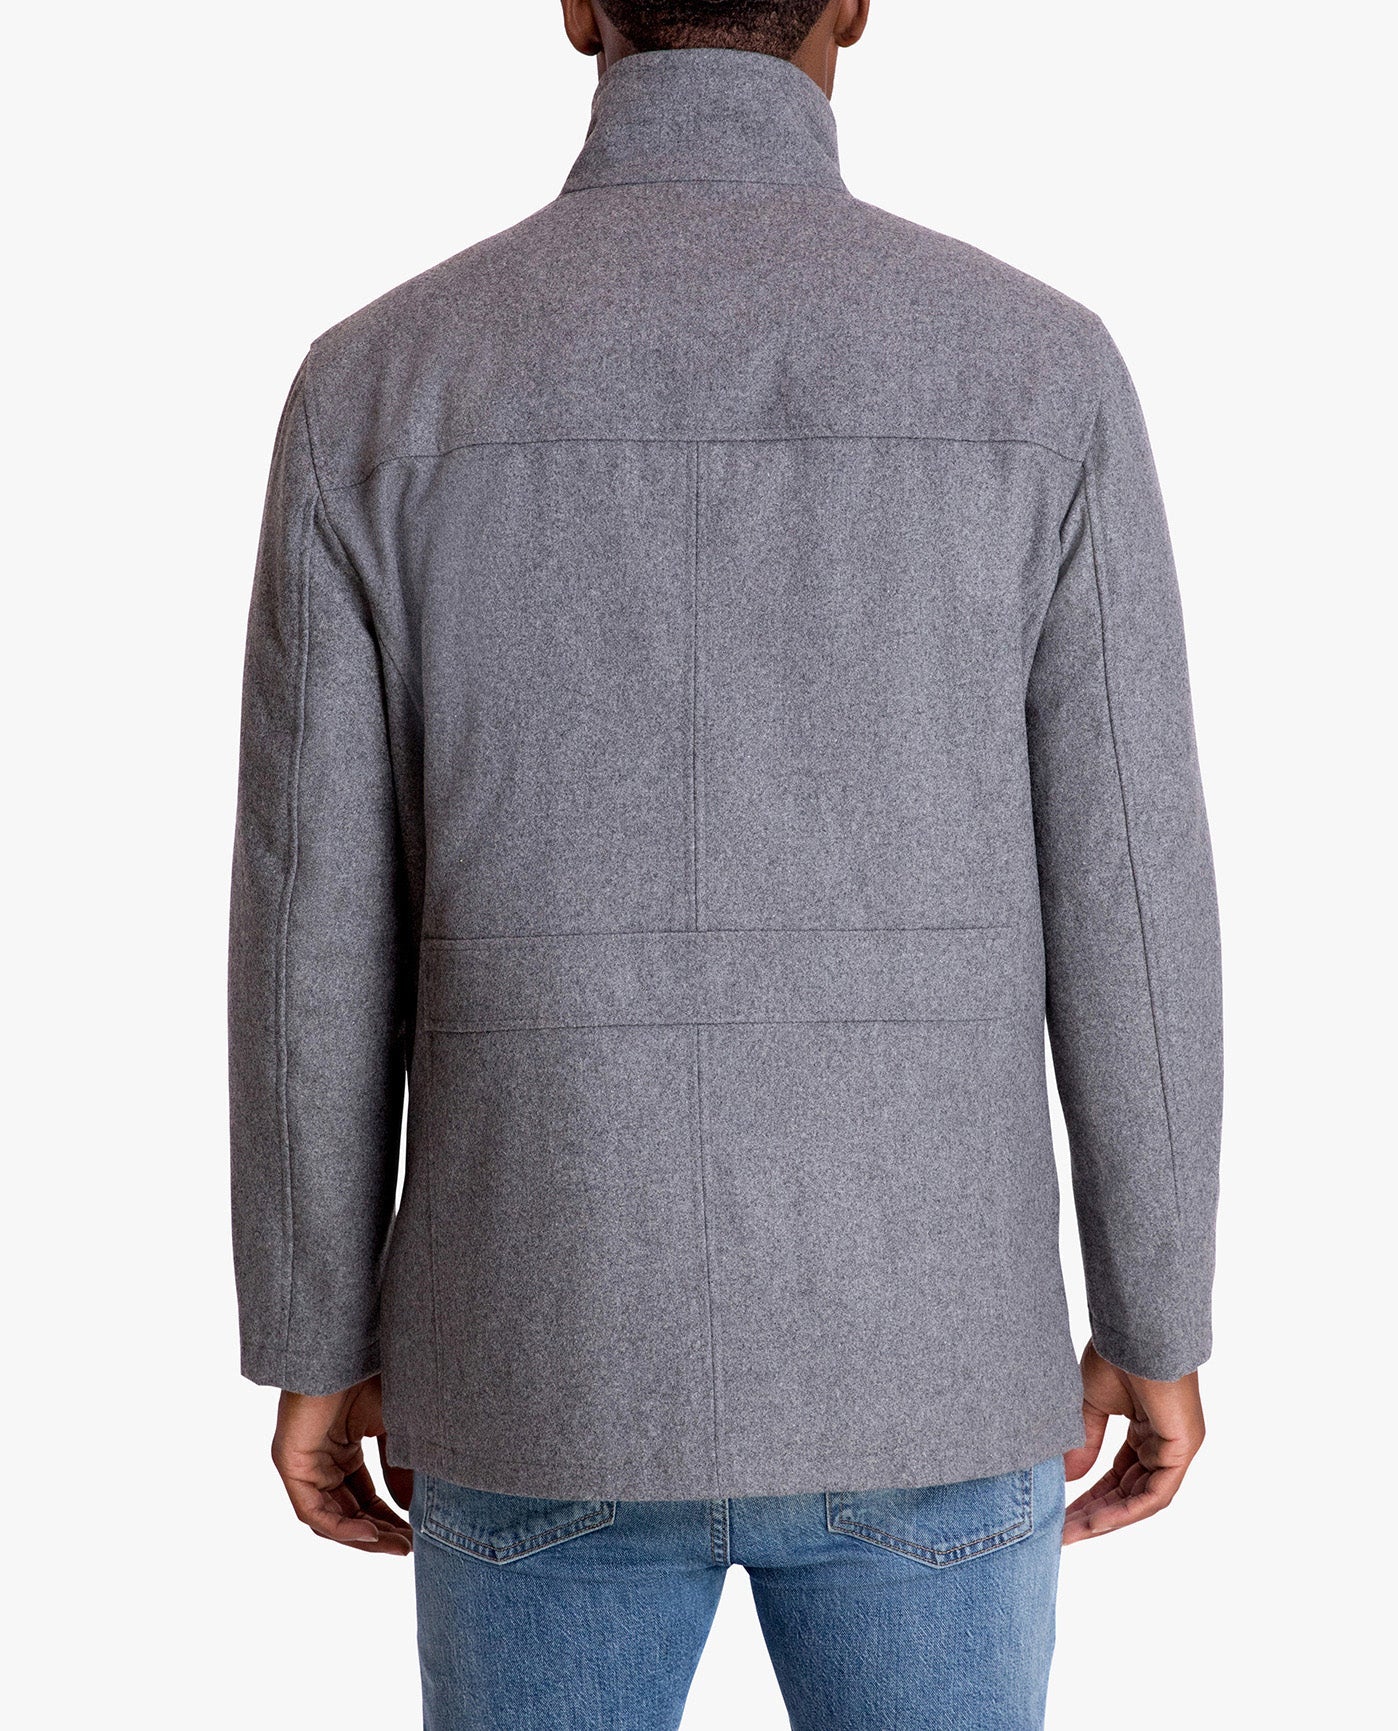 BACK VIEW OF AMHERST BUTTON FRONT WOOL JACKET | MEDIUM GREY